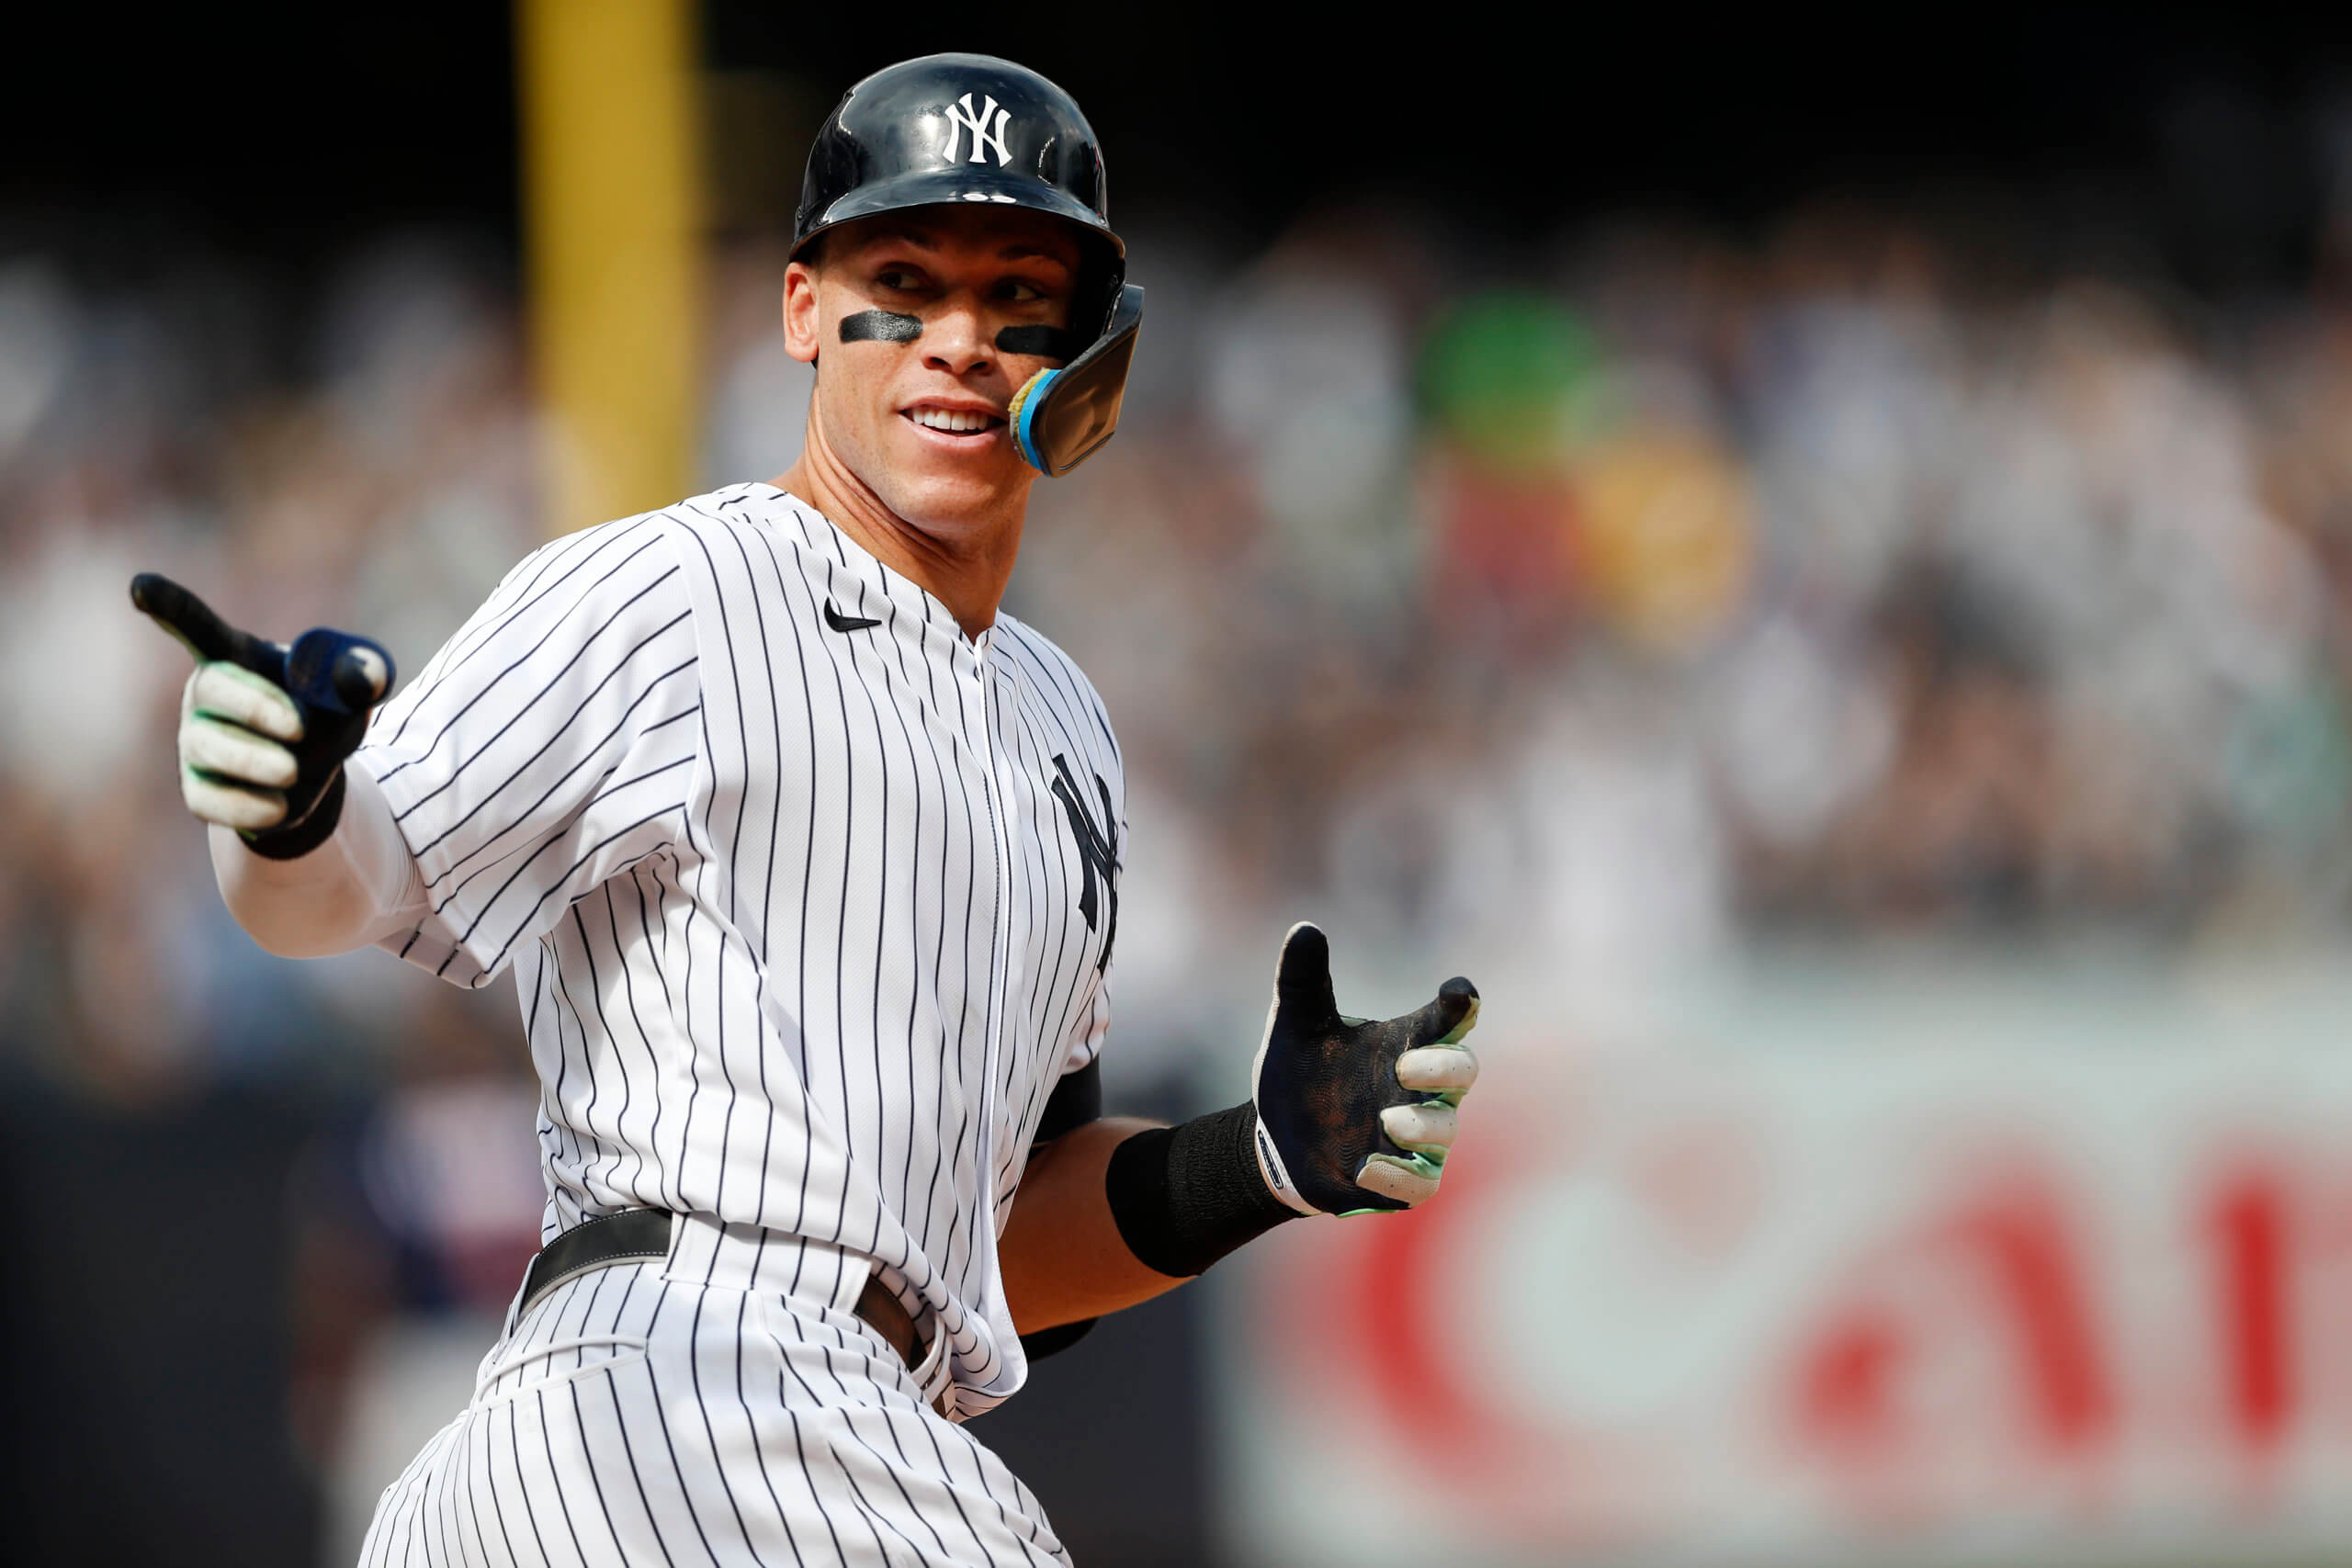 As Yankees face Giants on Opening Day, all eyes are on Aaron Judge